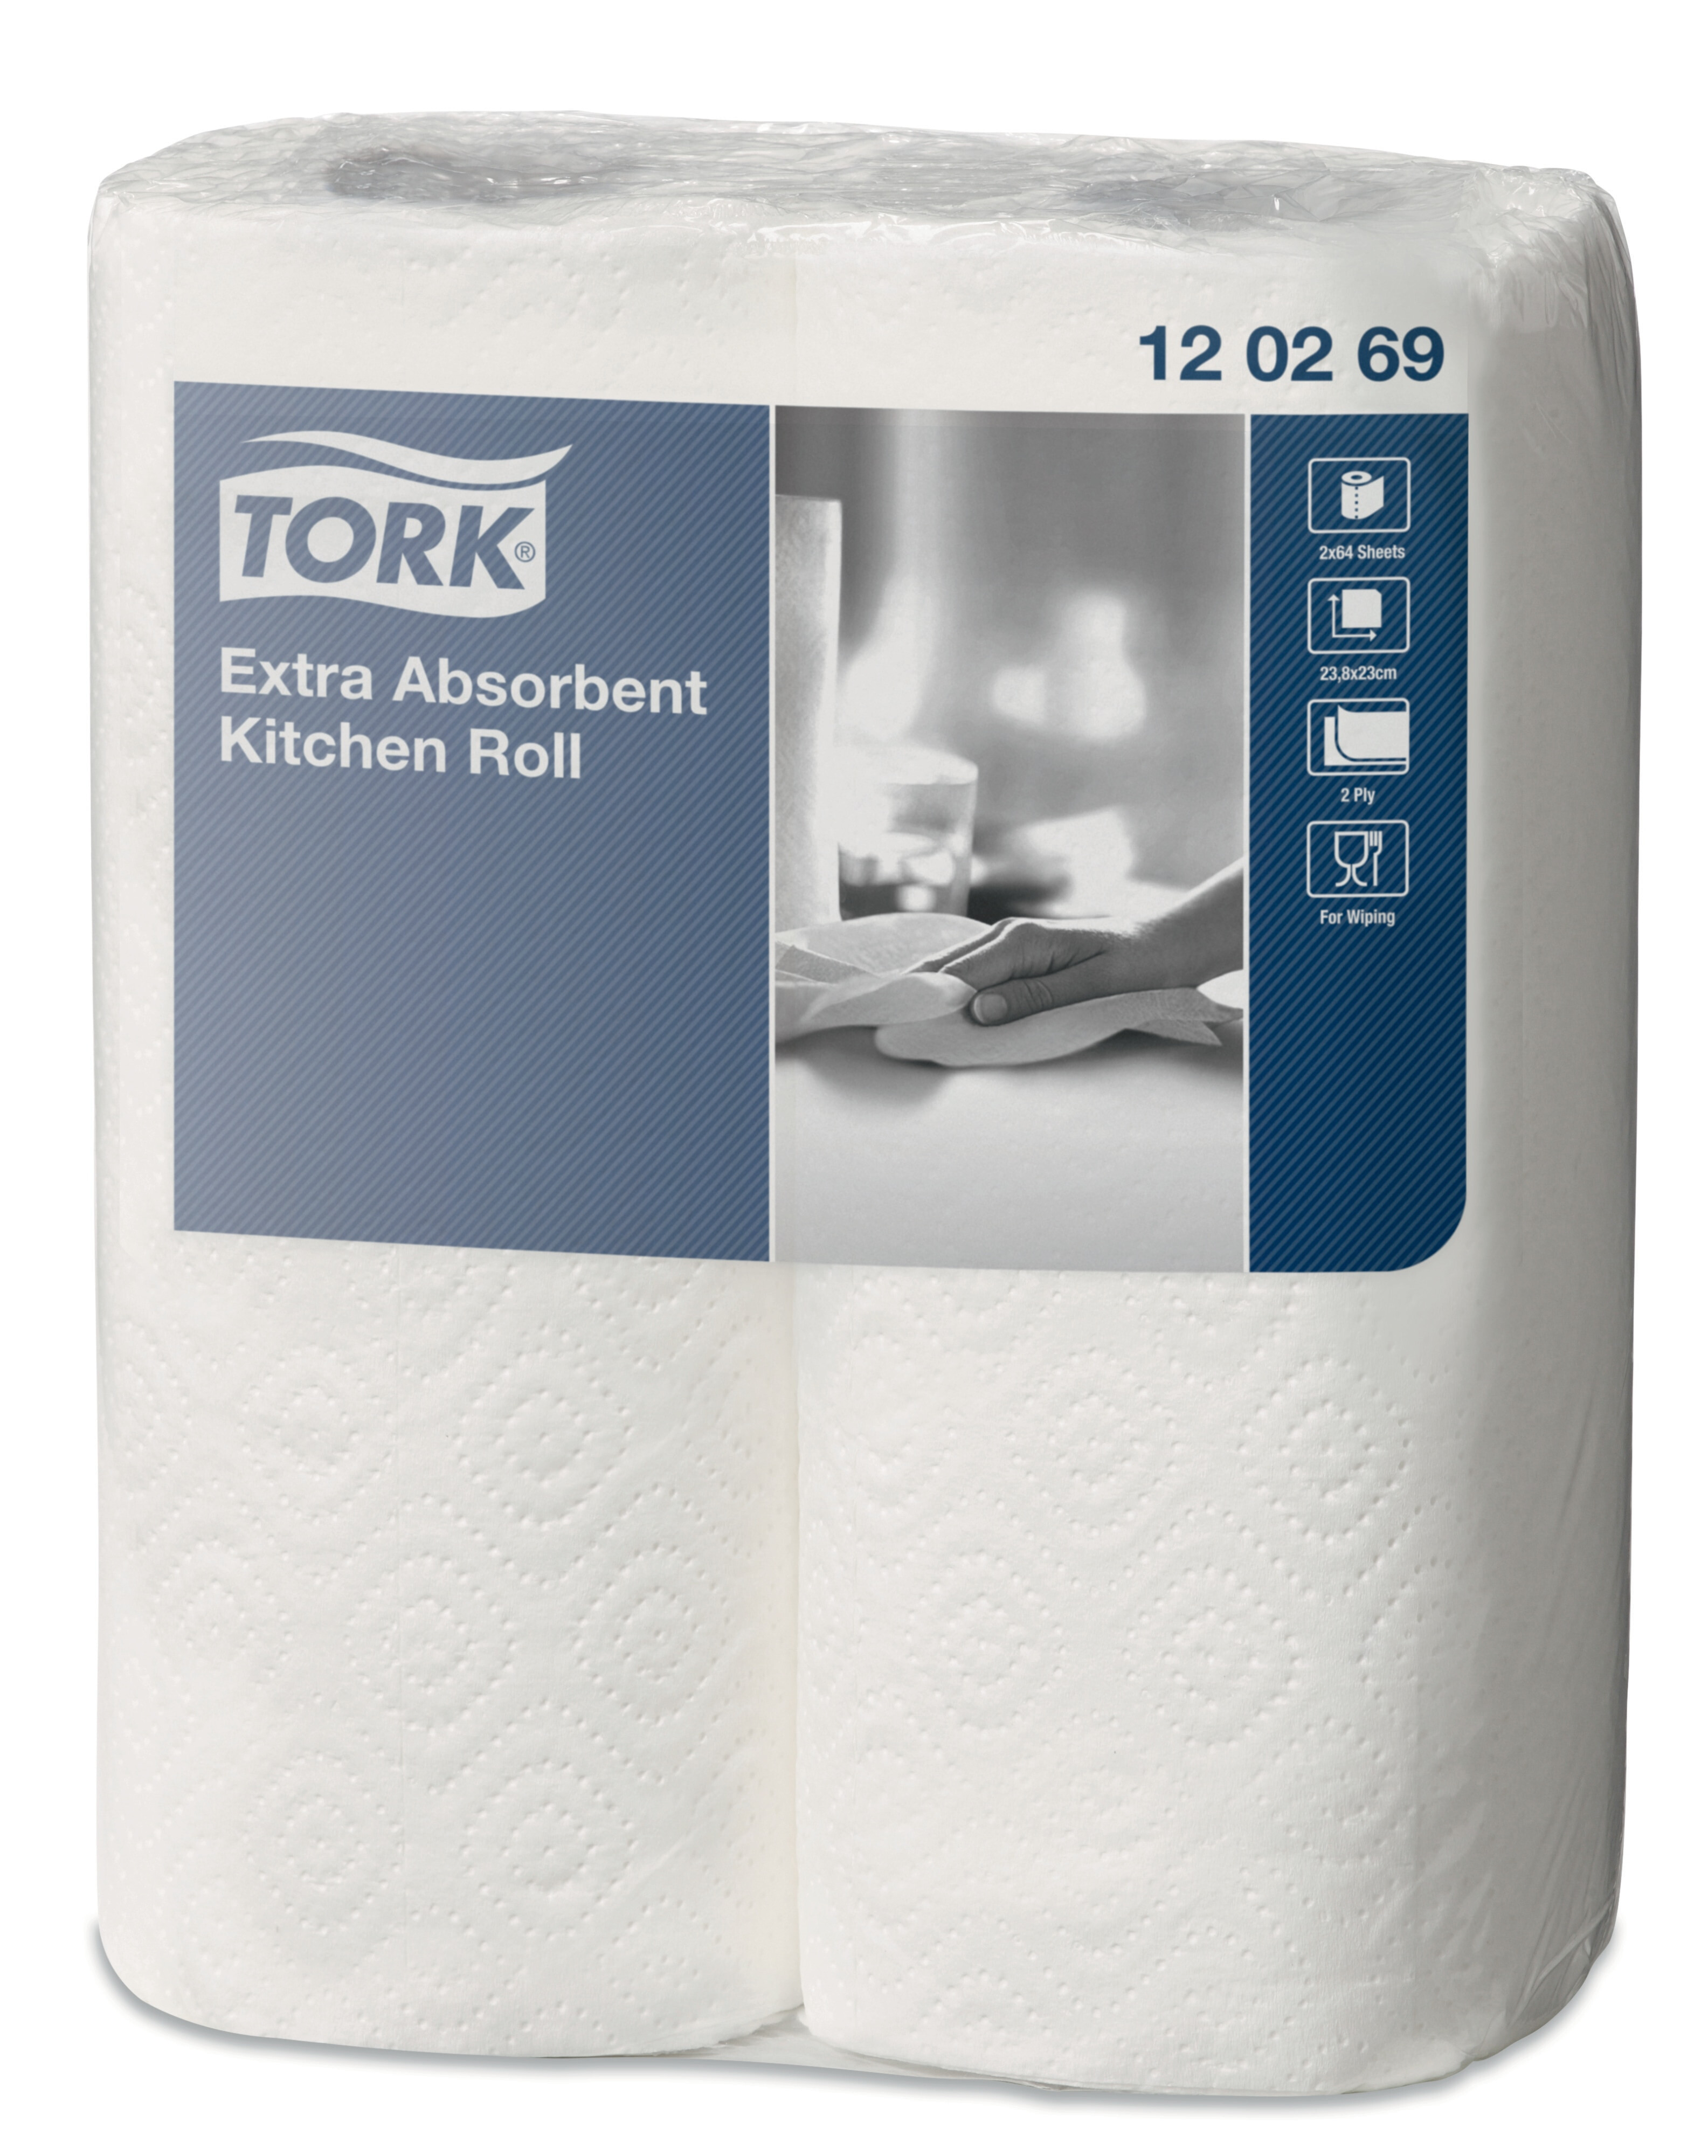 Tork Household Kitchen Paper Roll 2-ply Extra Absorbant 12x2rolls 120269